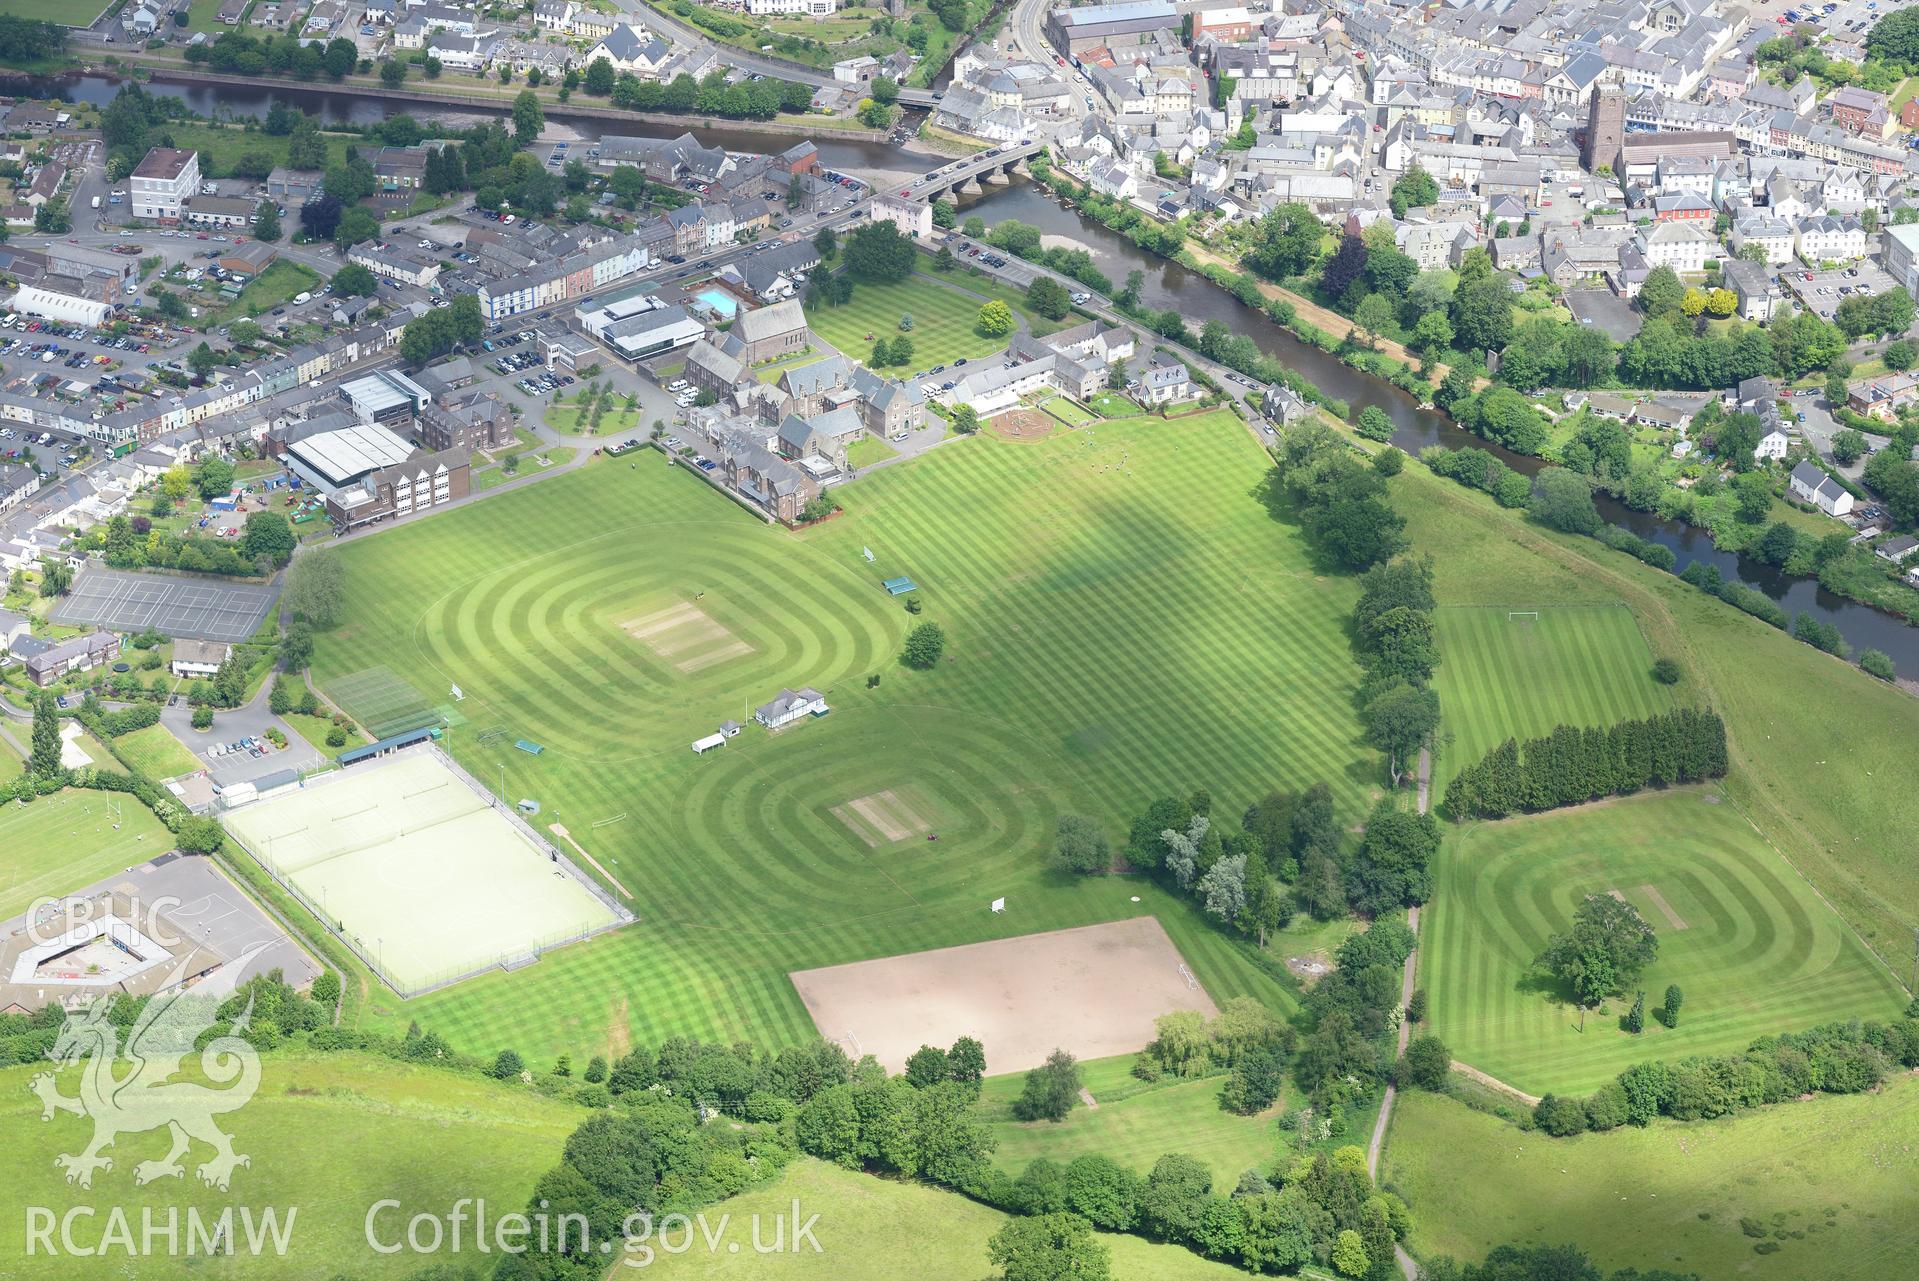 Christ College and the playing fields attached. Oblique aerial photograph taken during the Royal Commission's programme of archaeological aerial reconnaissance by Toby Driver on 29th June 2015.